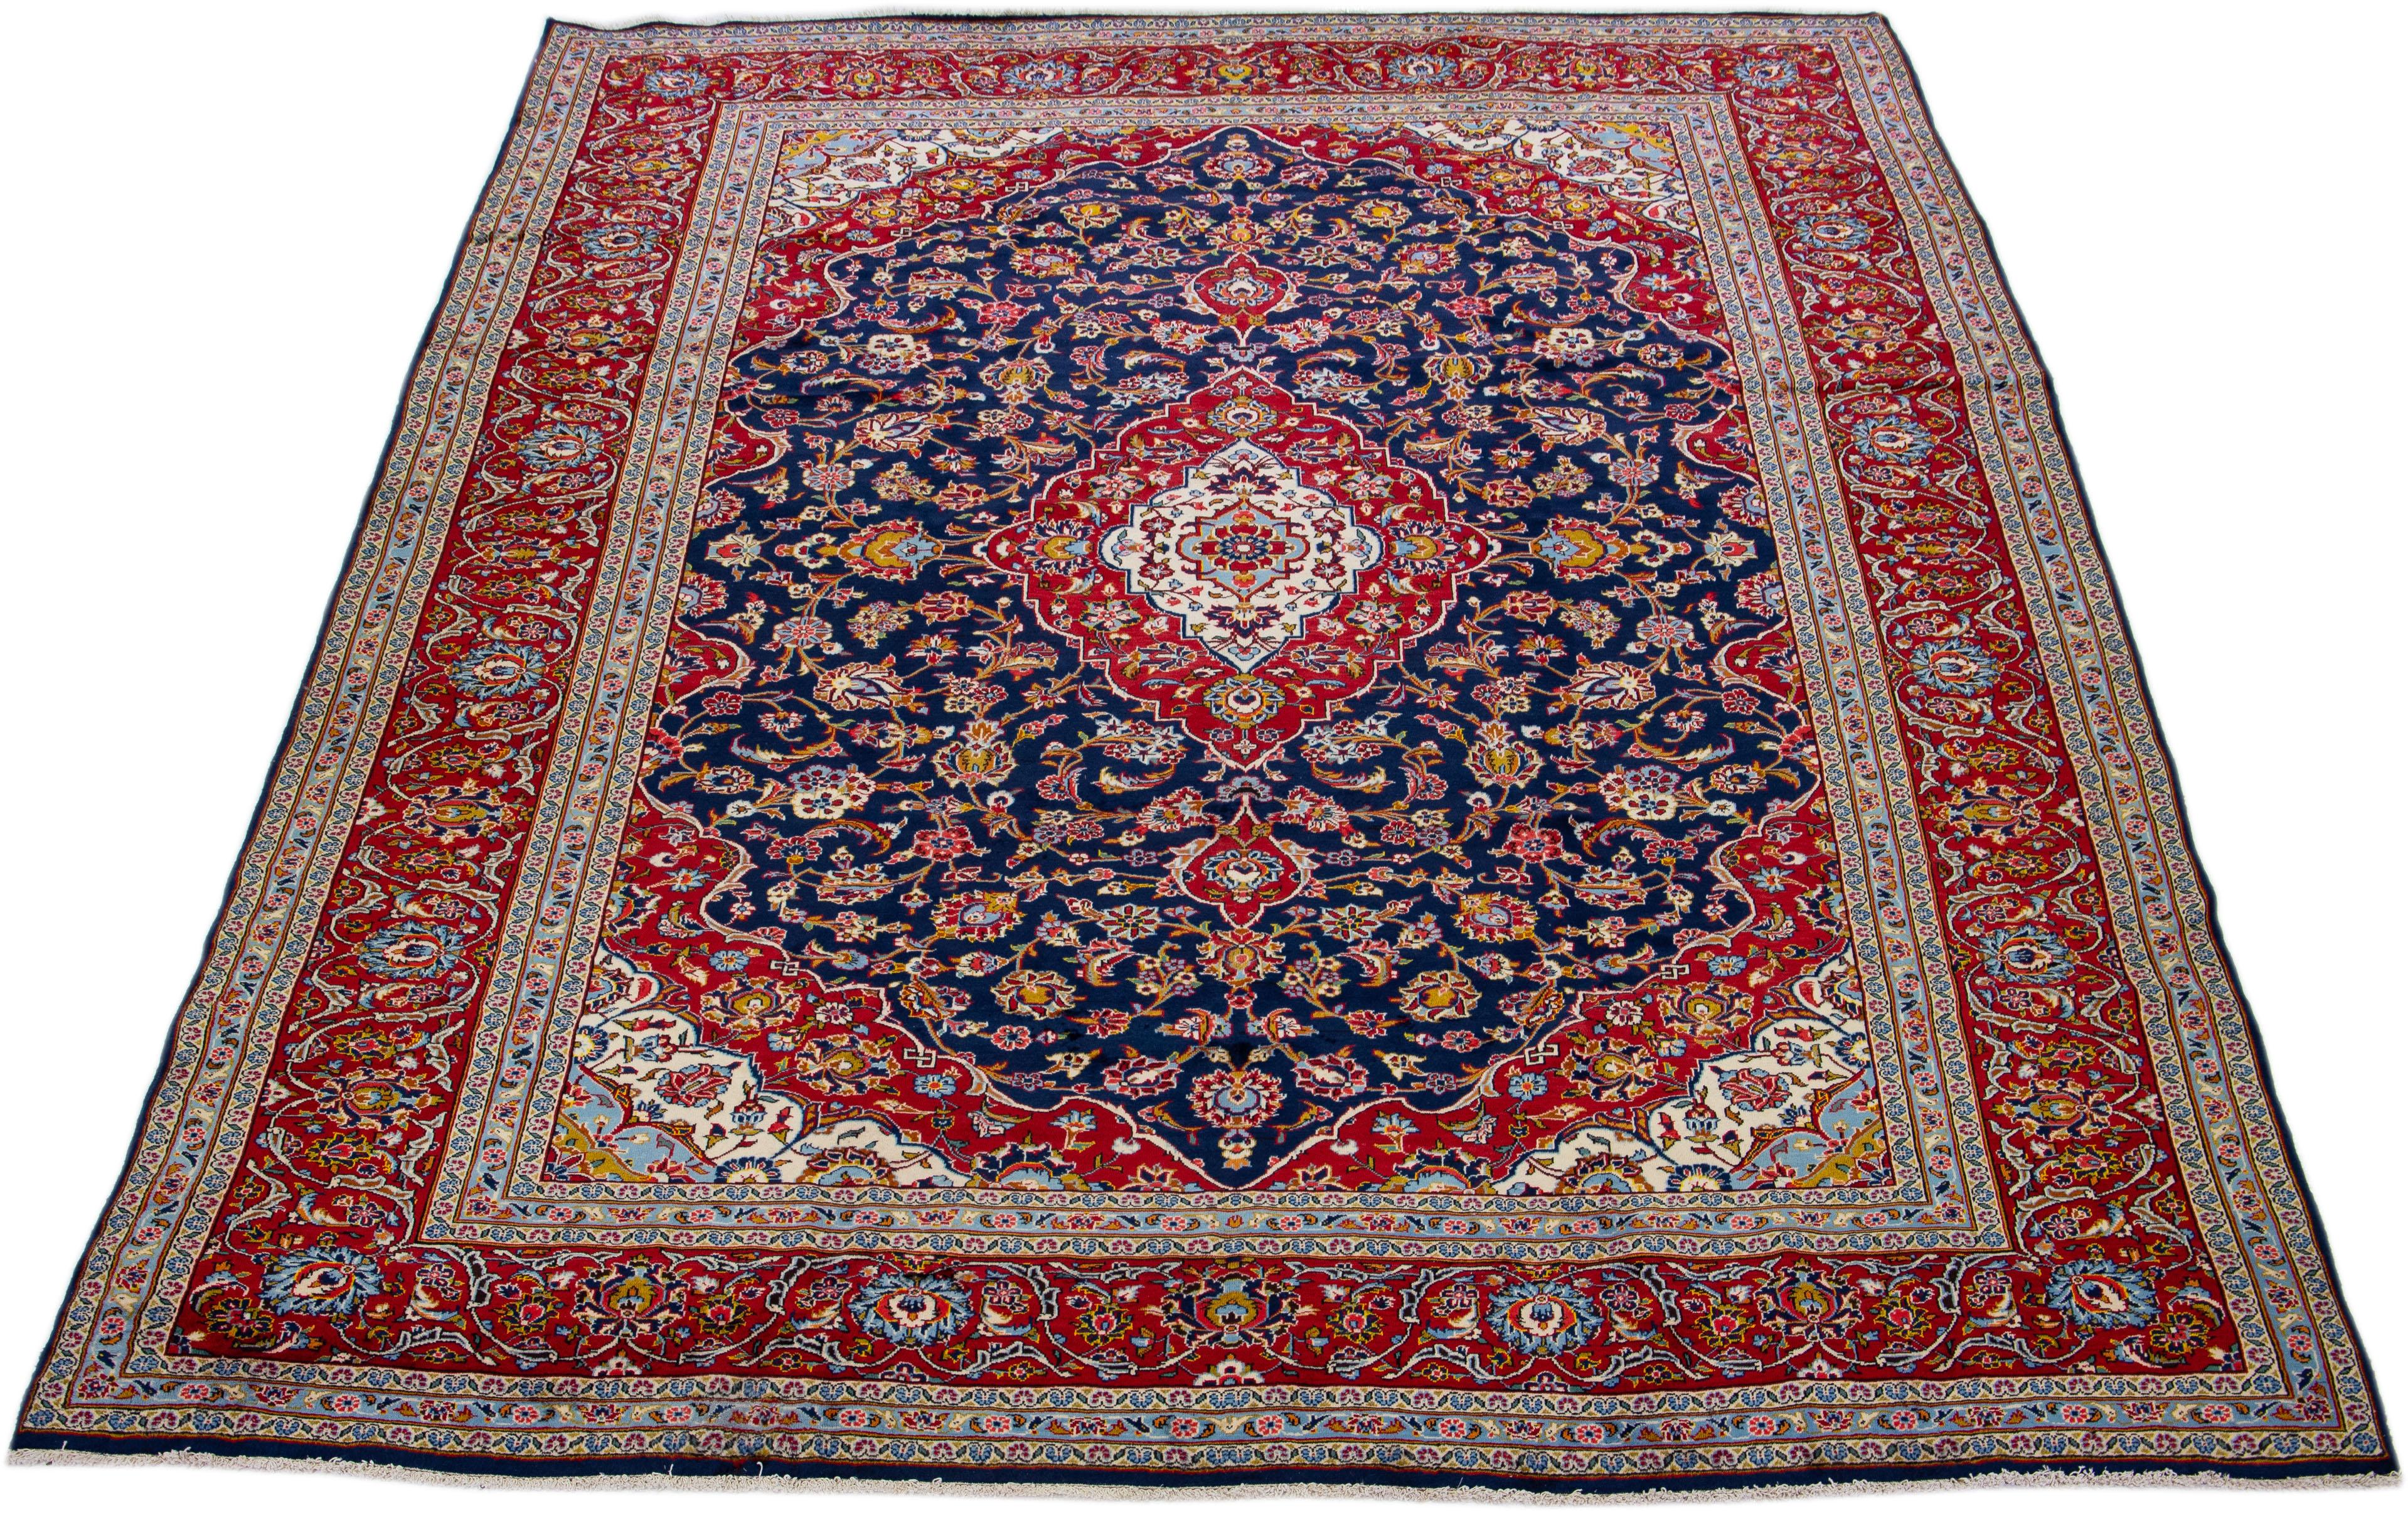 Beautiful antique Kashan hand-knotted wool rug with a navy blue color field. This Persian rug has a rusted frame and multicolor accents in a gorgeous all-over medallion floral design. 

This rug measures 10' x 13'3